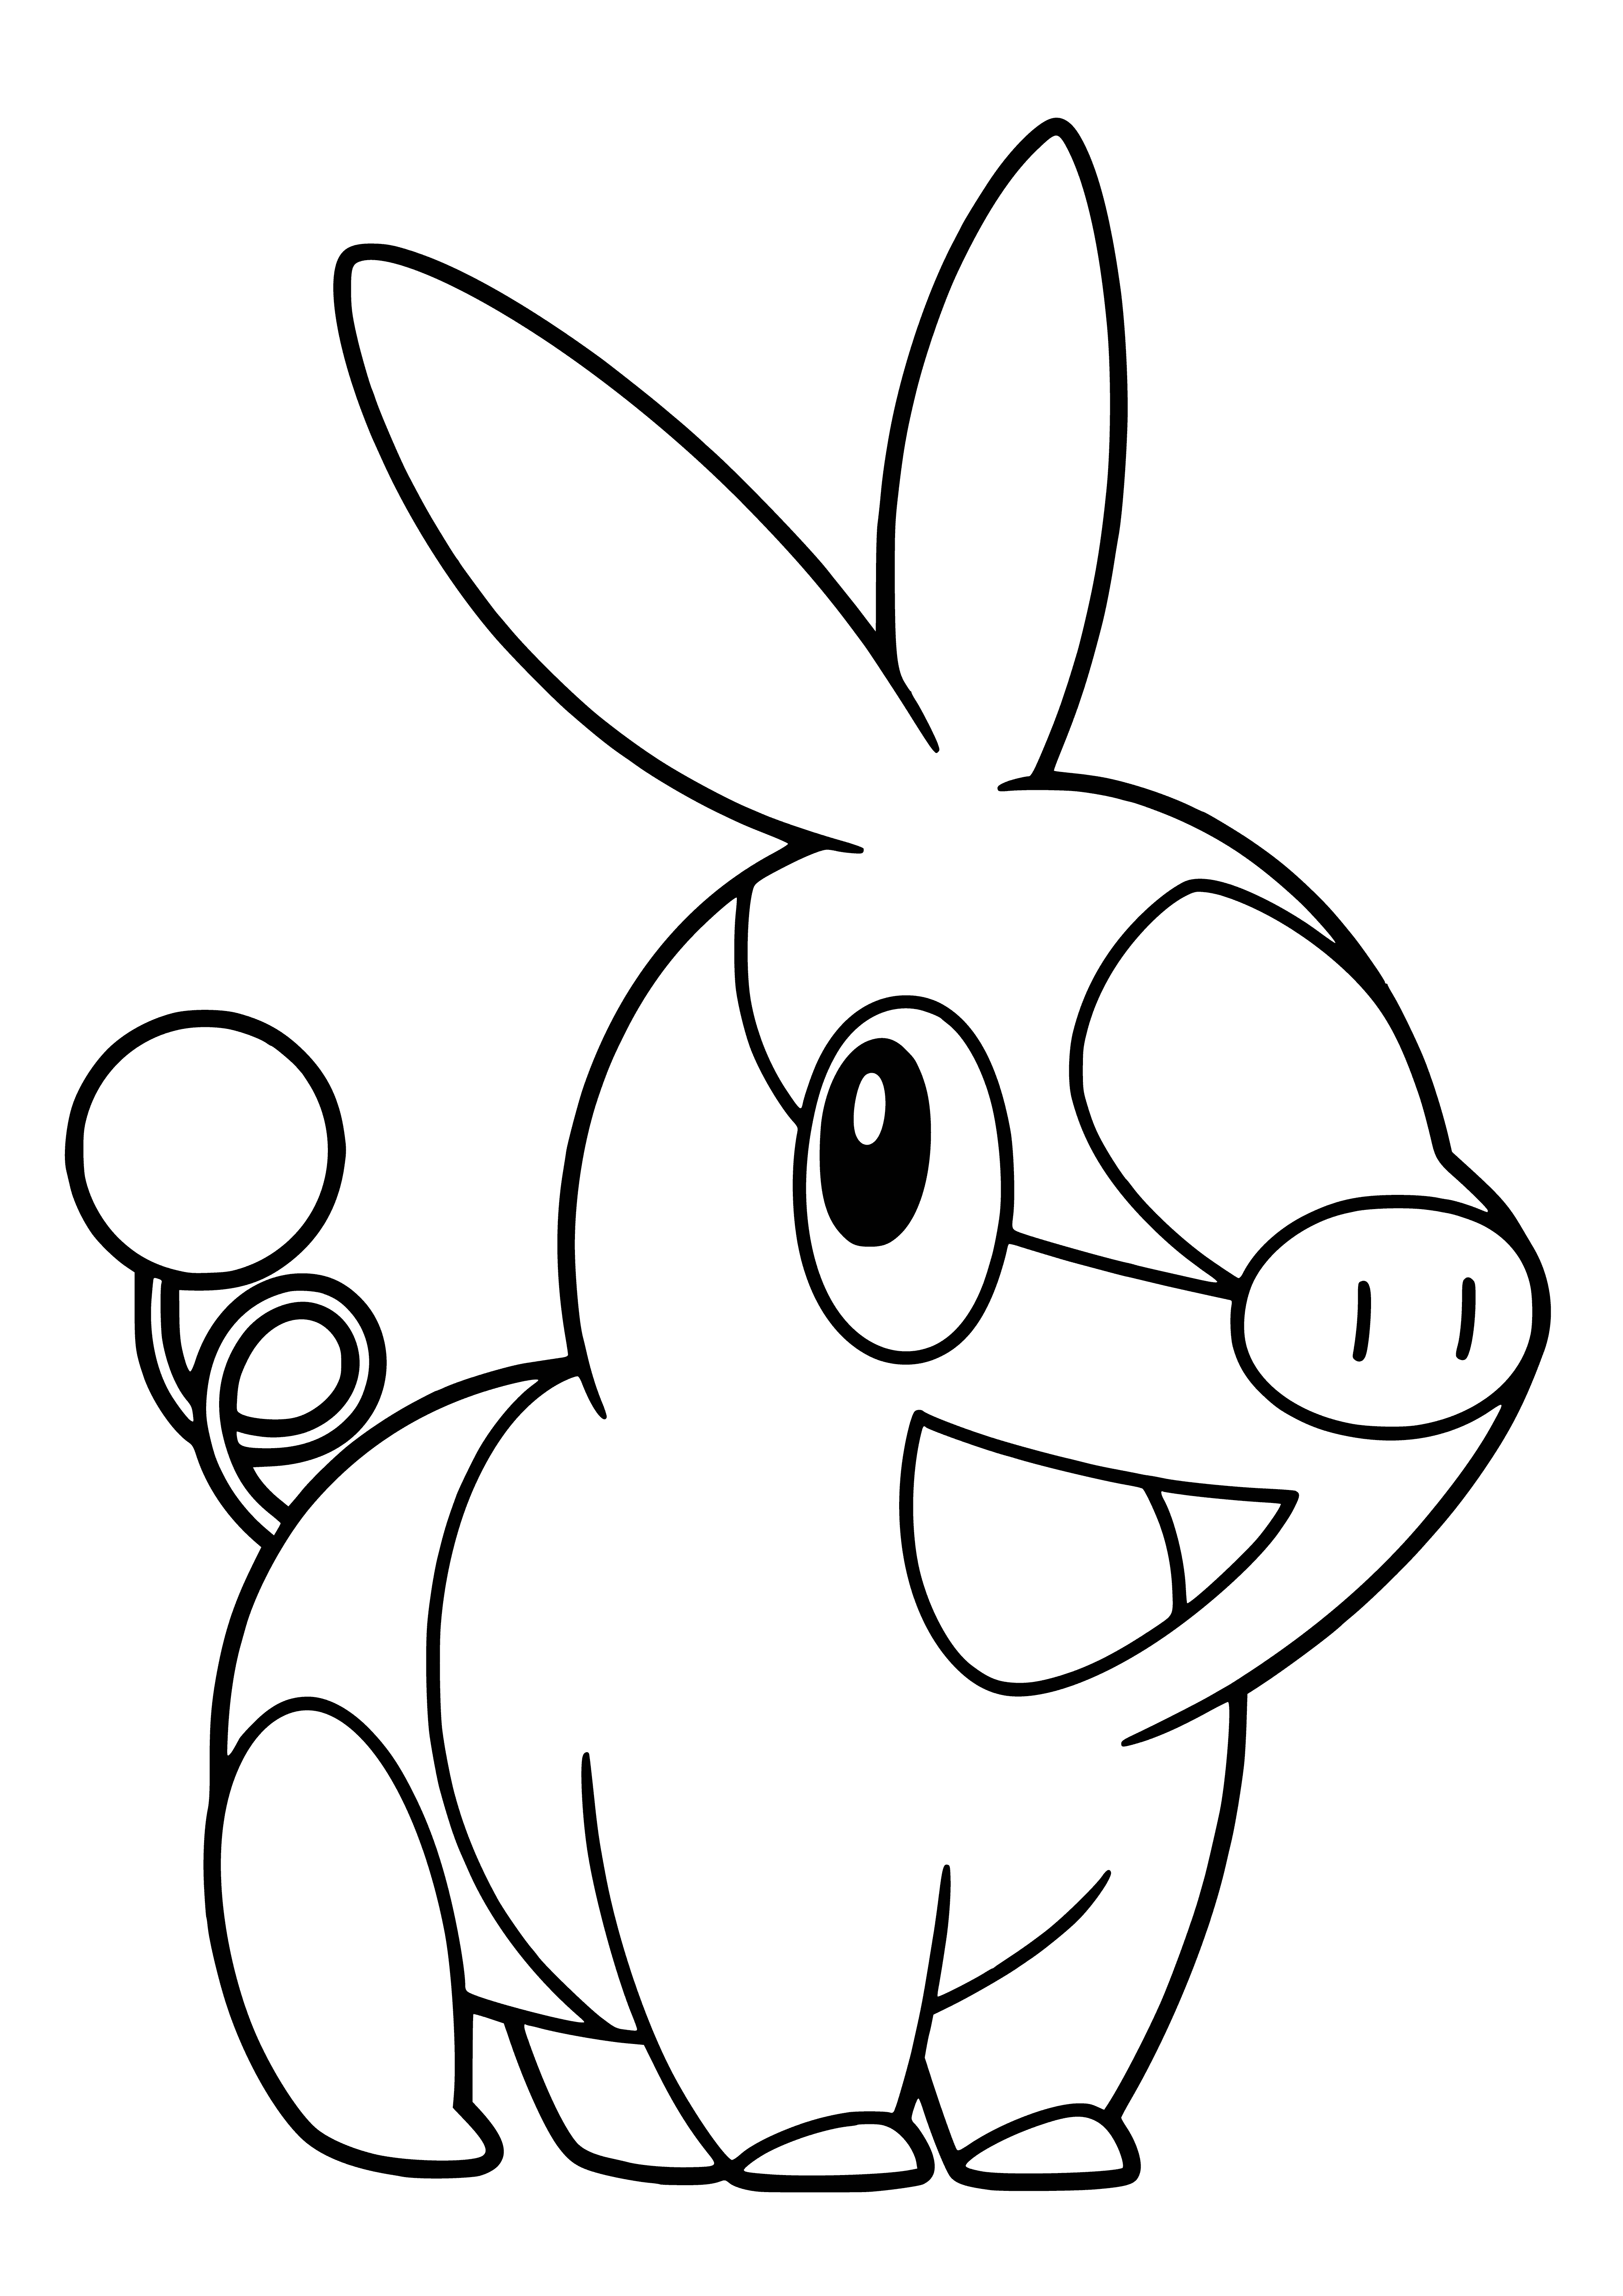 coloring page: Carpet is a brown, 4-legged Pokemon w/ long snout & big ears that evolves into Rug. Color this page & learn more!